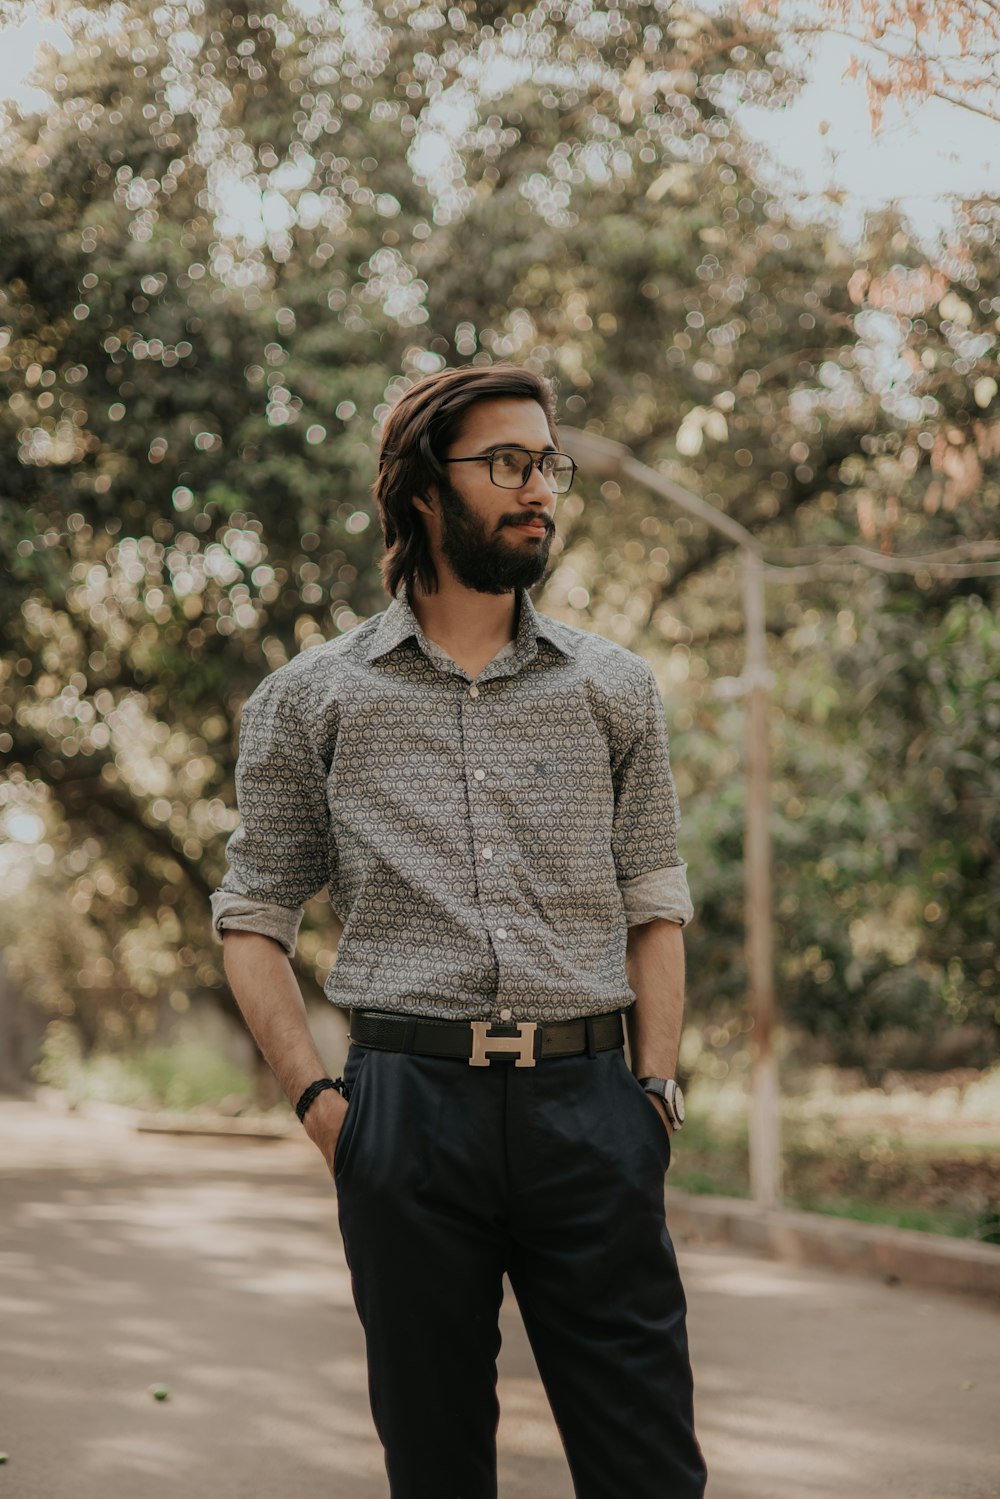 Woman in blue dress shirt and black pants standing near green trees during  daytime photo – Free Smile Image on Unsplash